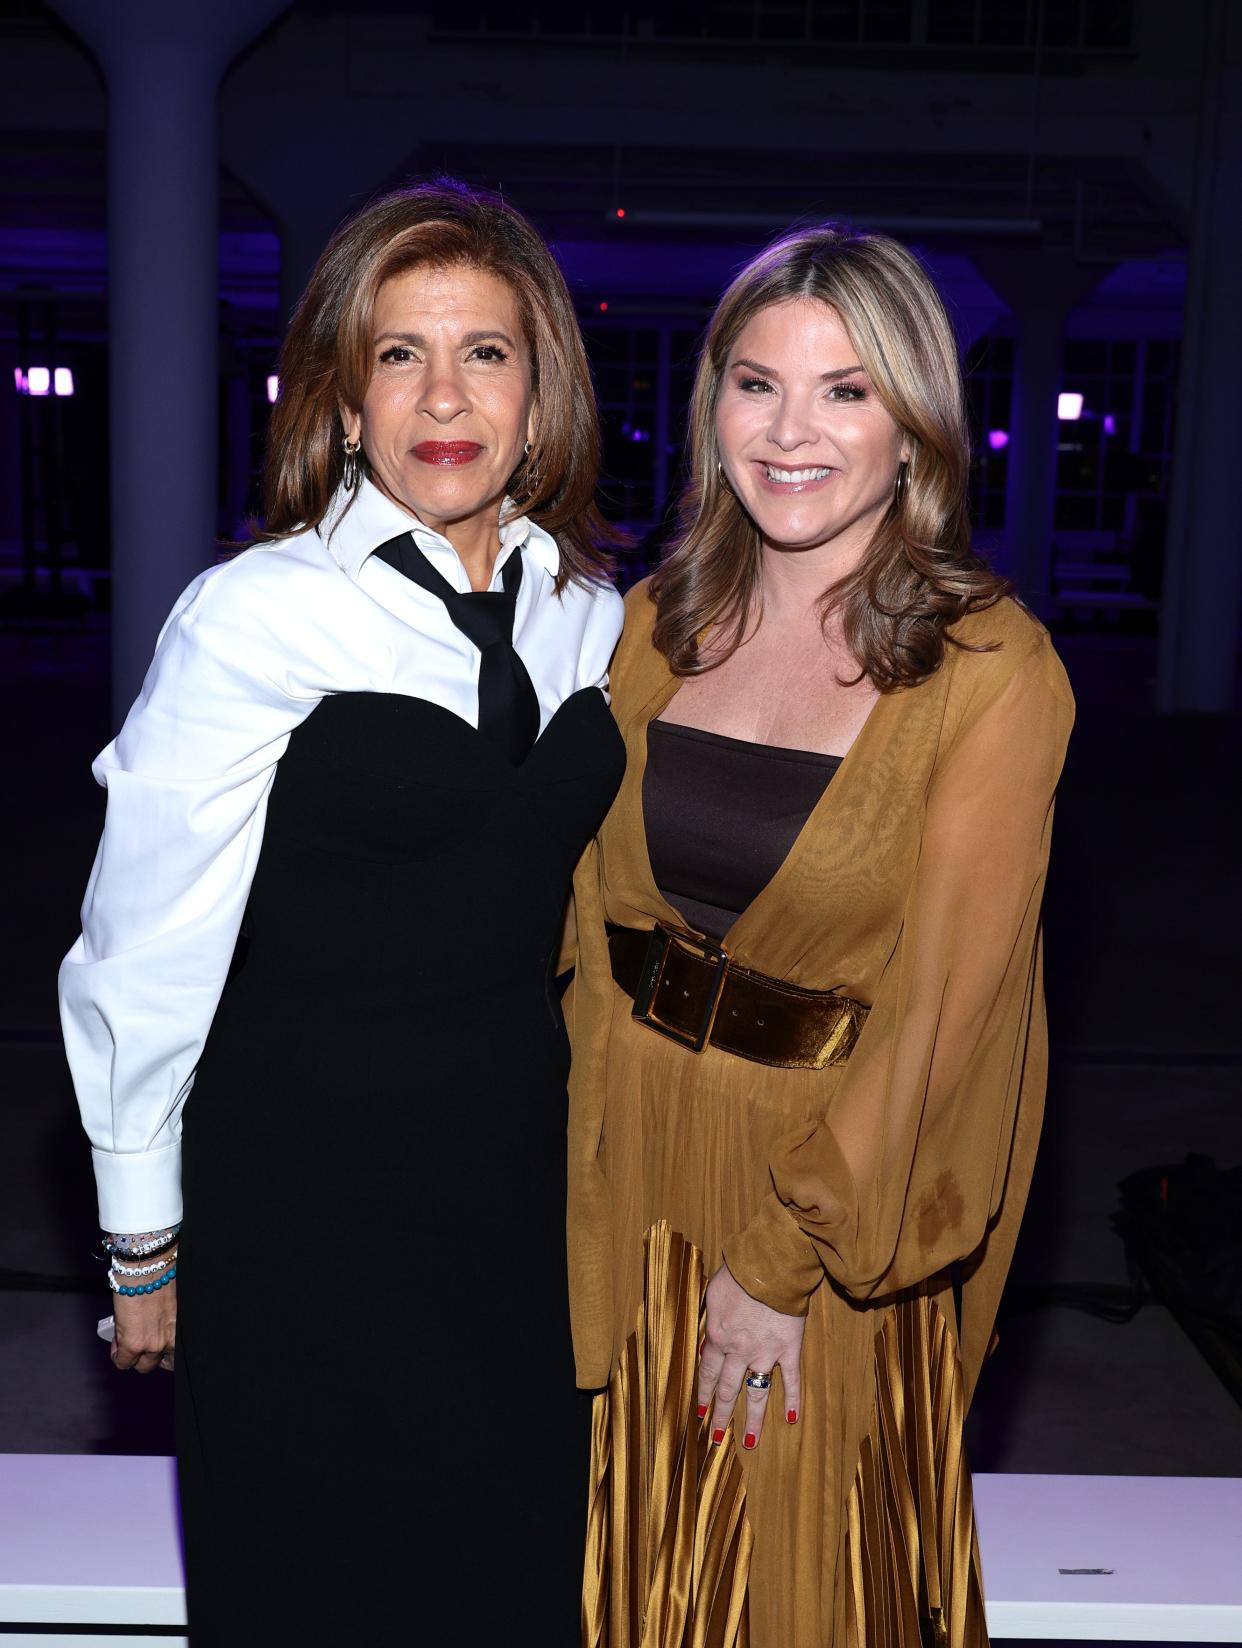 Hota Kotb and Jenna Bush Hager are saying "mama is done" after the latter lost her daughter's friend at a theme park.